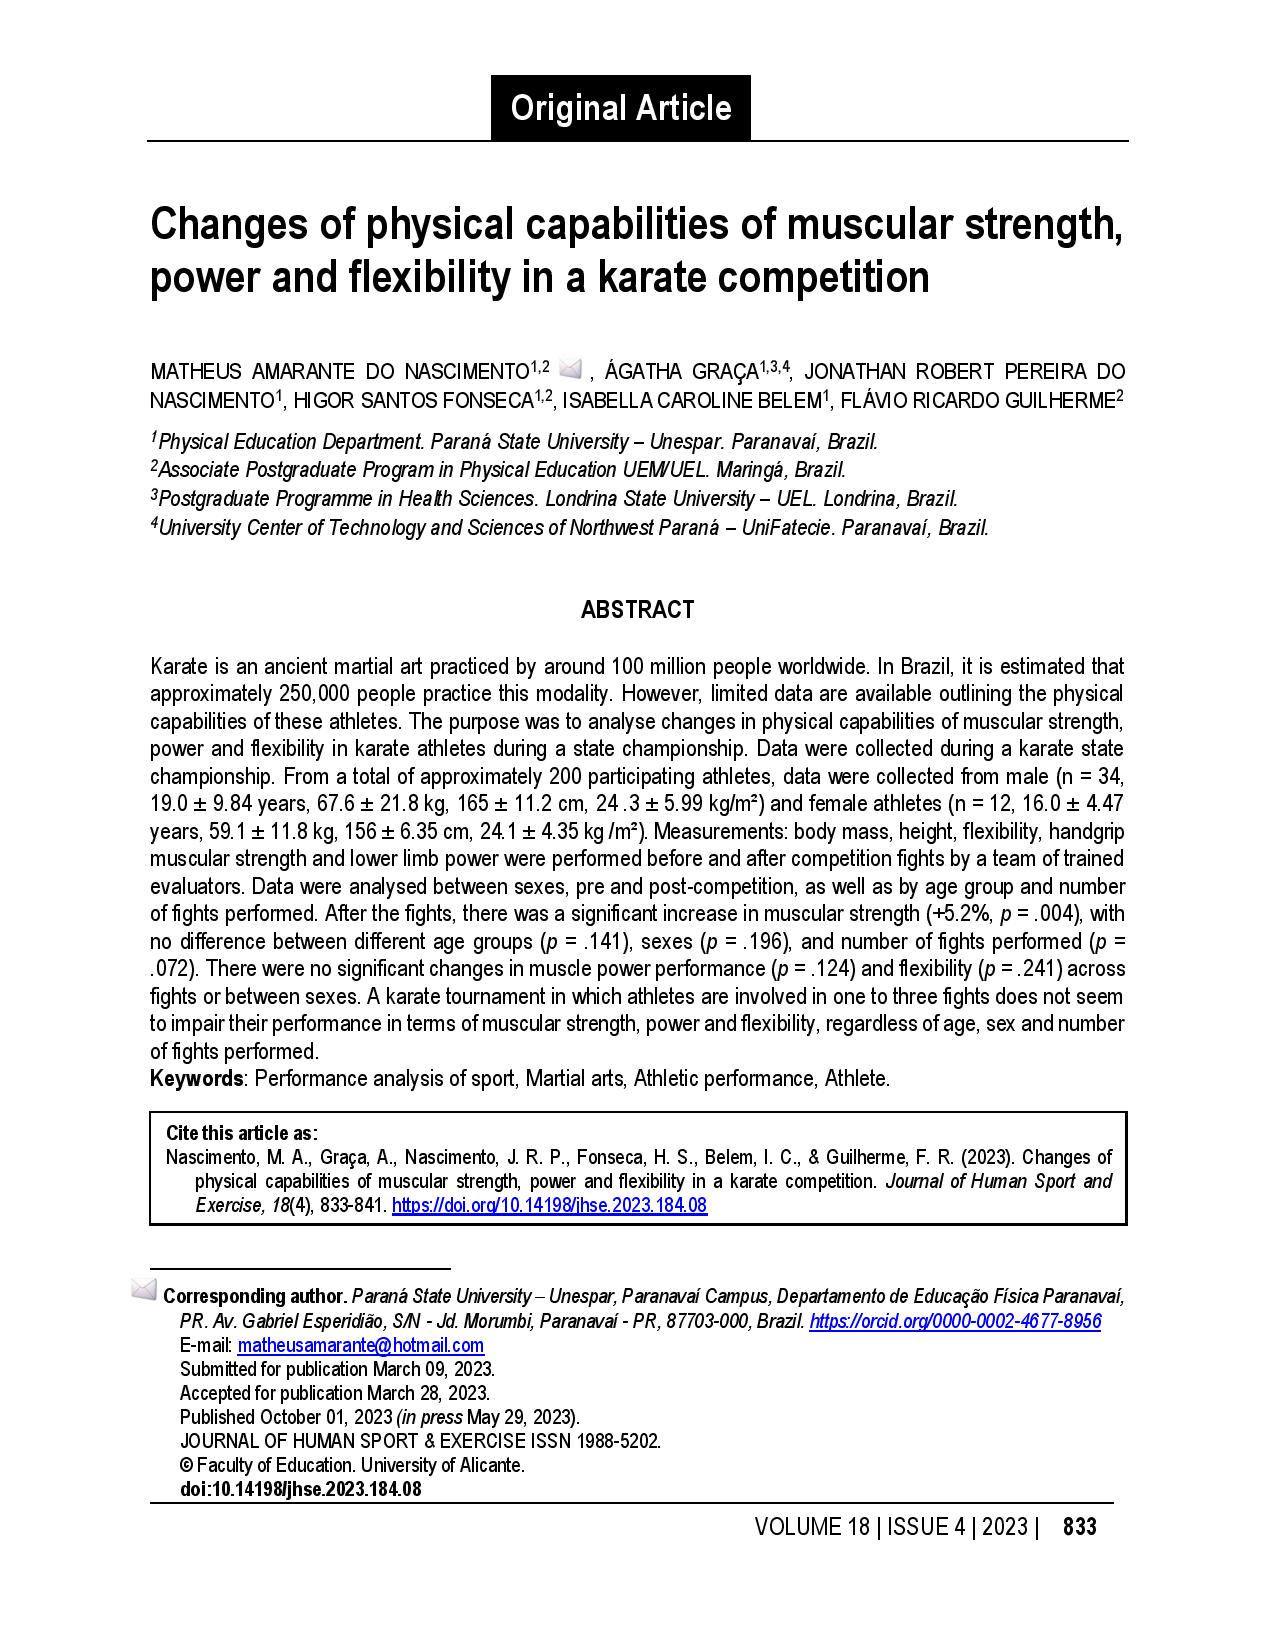 Changes of physical capabilities of muscular strength, power and flexibility in a karate competition